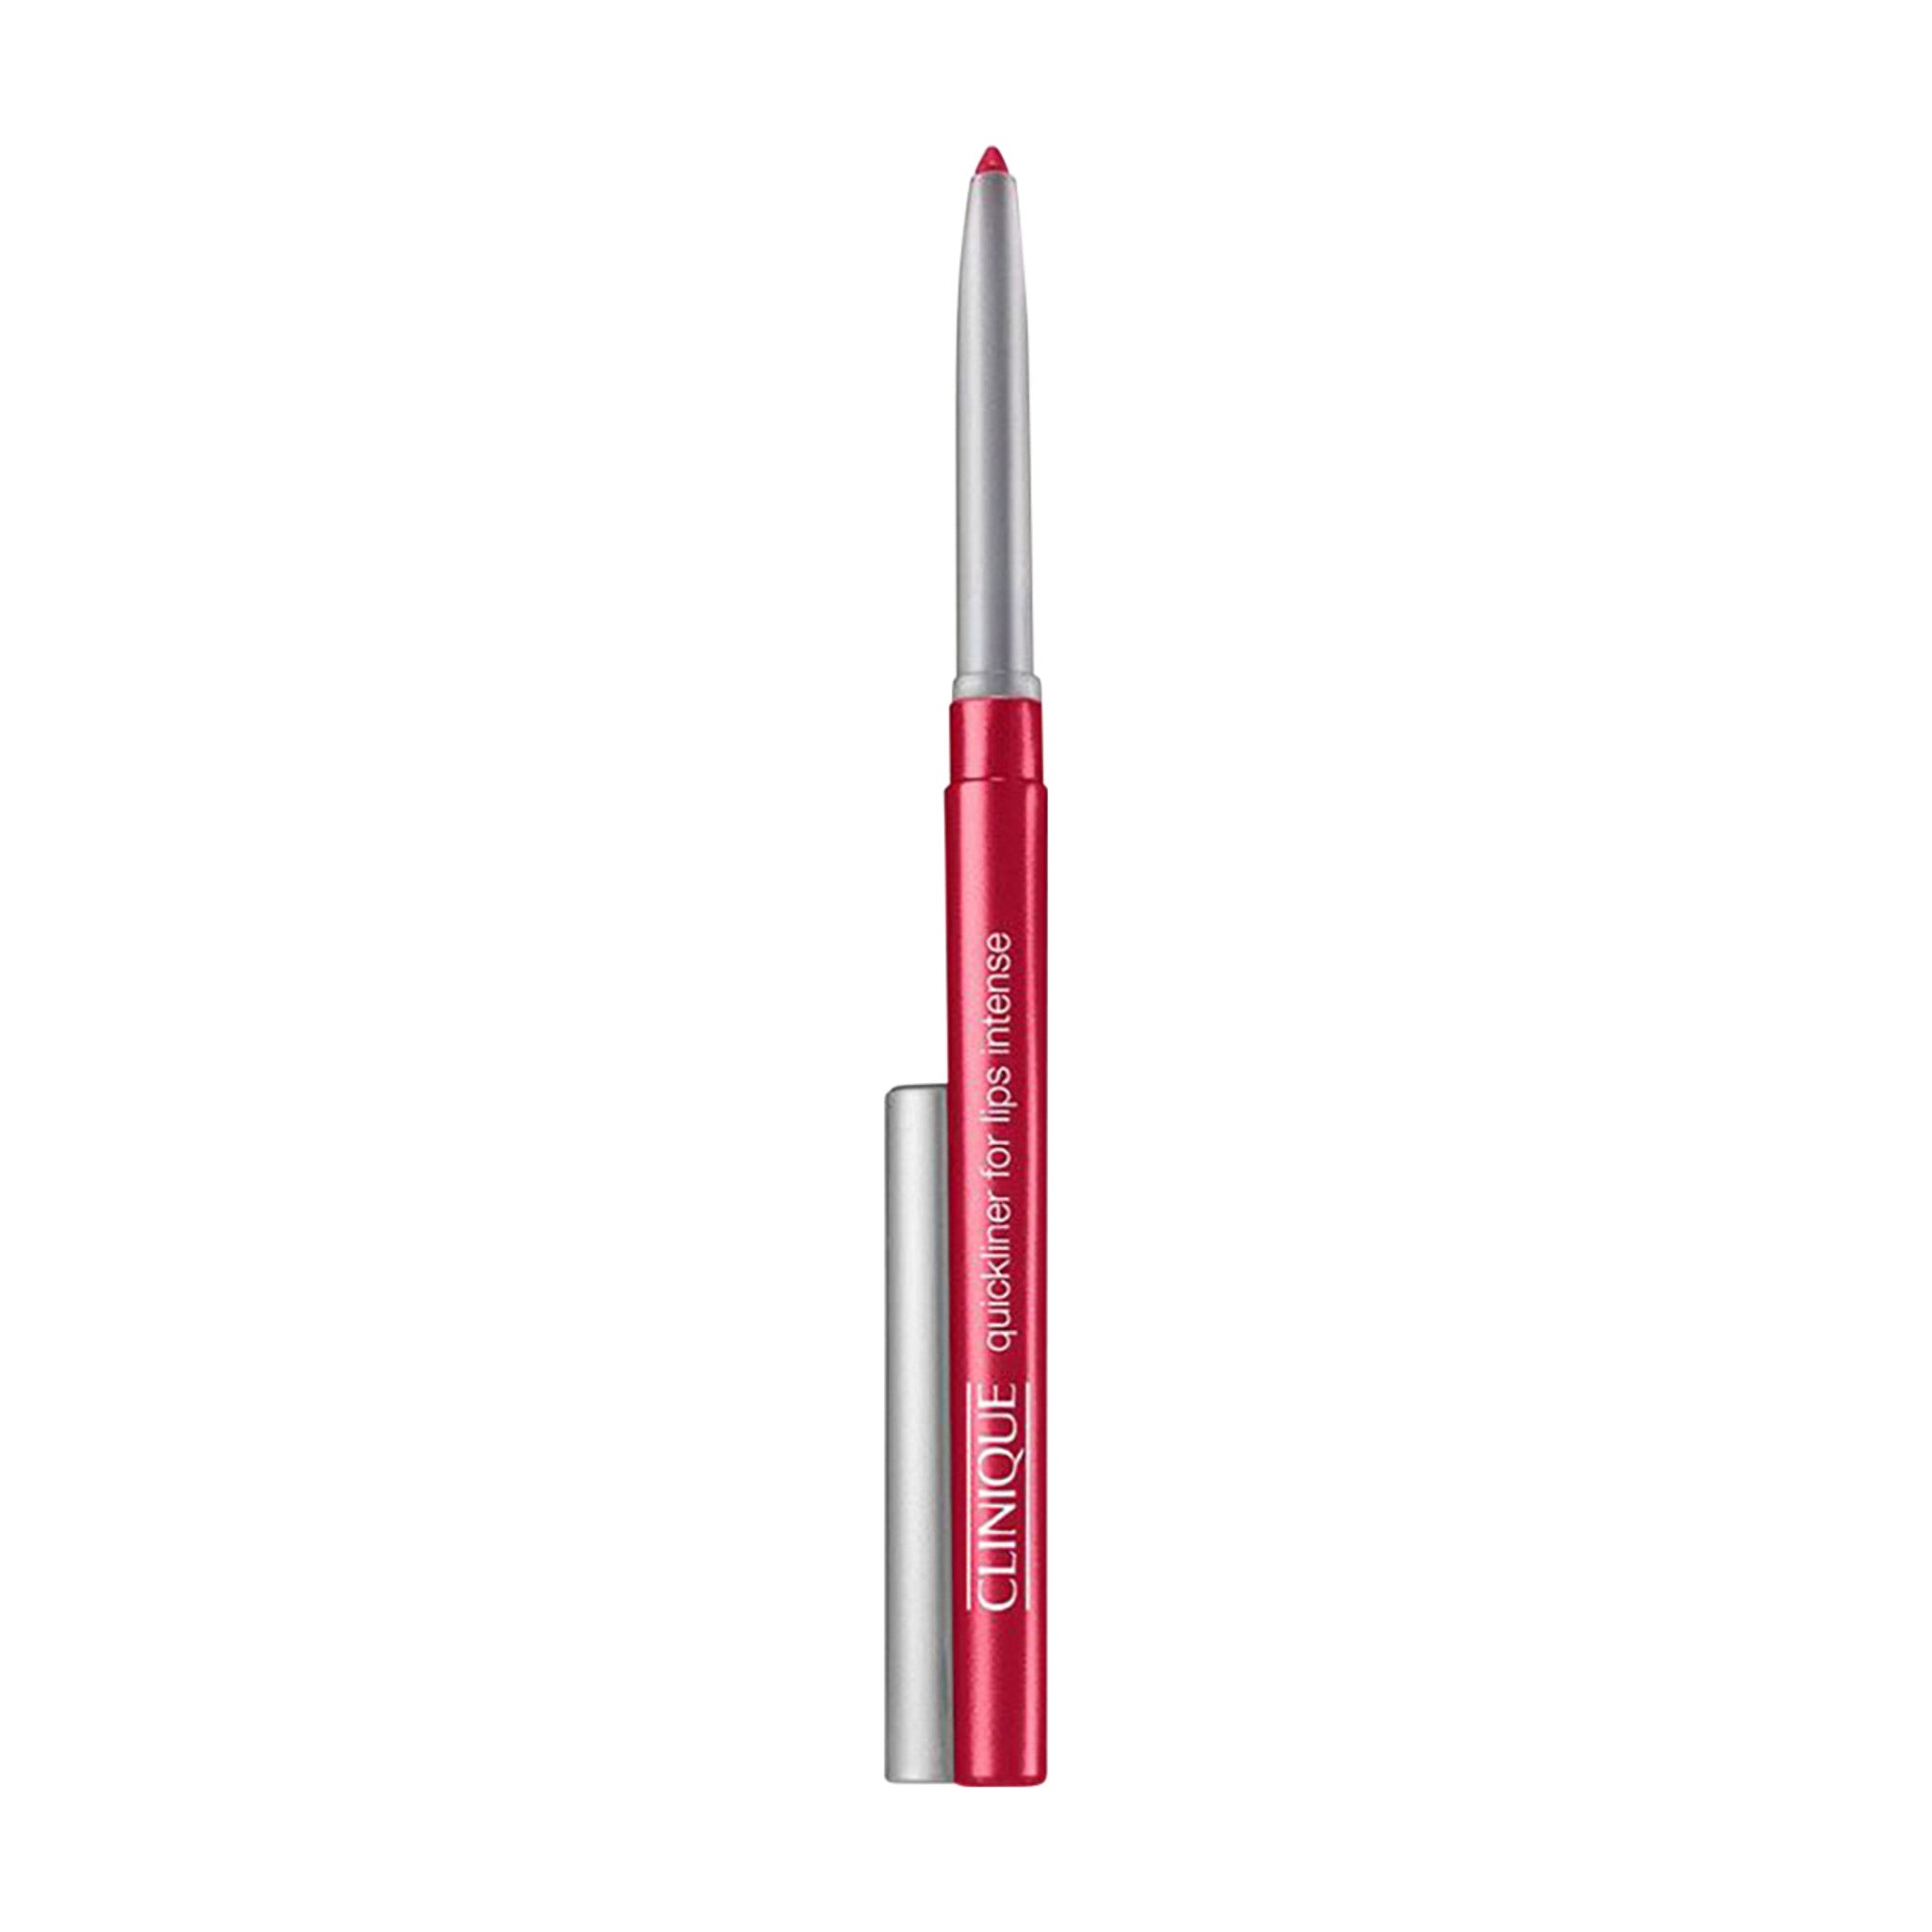 Clinique Quickliner For Lips Intense Color/Shade variant: INTENSE PASSION main image. This product is in the color red